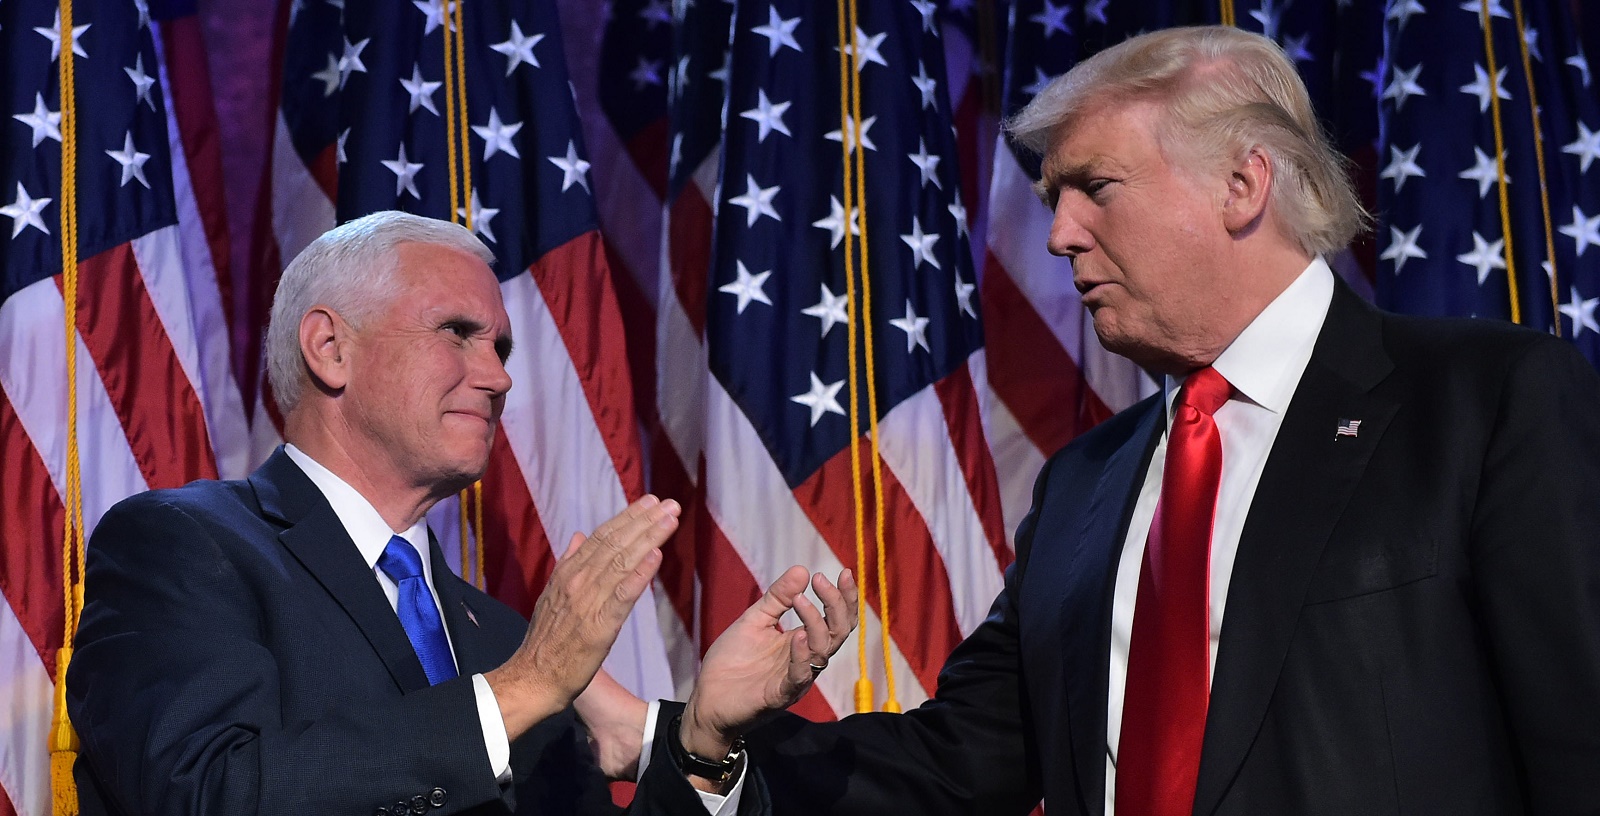 Republican presidential elect Donald Trump (R) reaches to his Vice President elect Mike Pence during election night at the New York Hilton Midtown in New York on November 9, 2016. Trump stunned America and the world Wednesday, riding a wave of populist resentment to defeat Hillary Clinton in the race to become the 45th president of the United States. / AFP / MANDEL NGAN (Photo credit should read MANDEL NGAN/AFP/Getty Images)